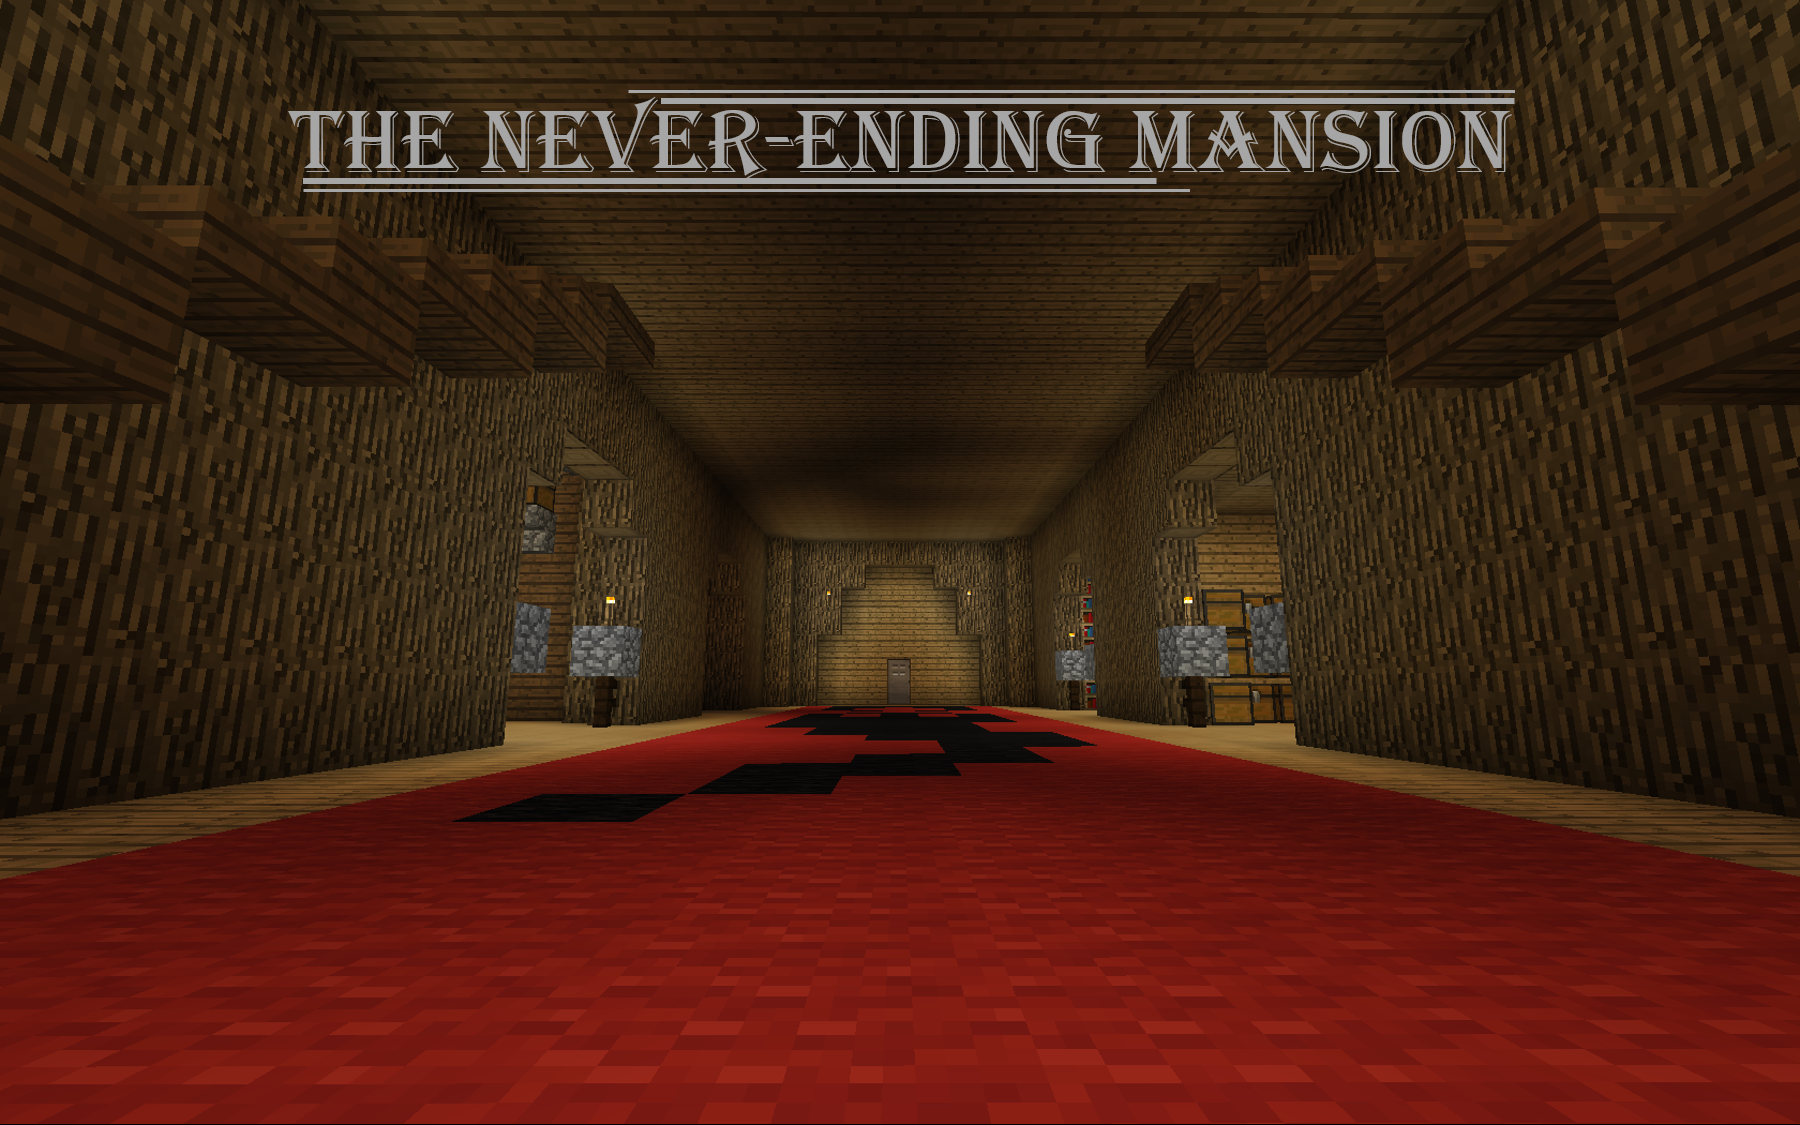 Download The Neverending Mansion for Minecraft 1.13.2